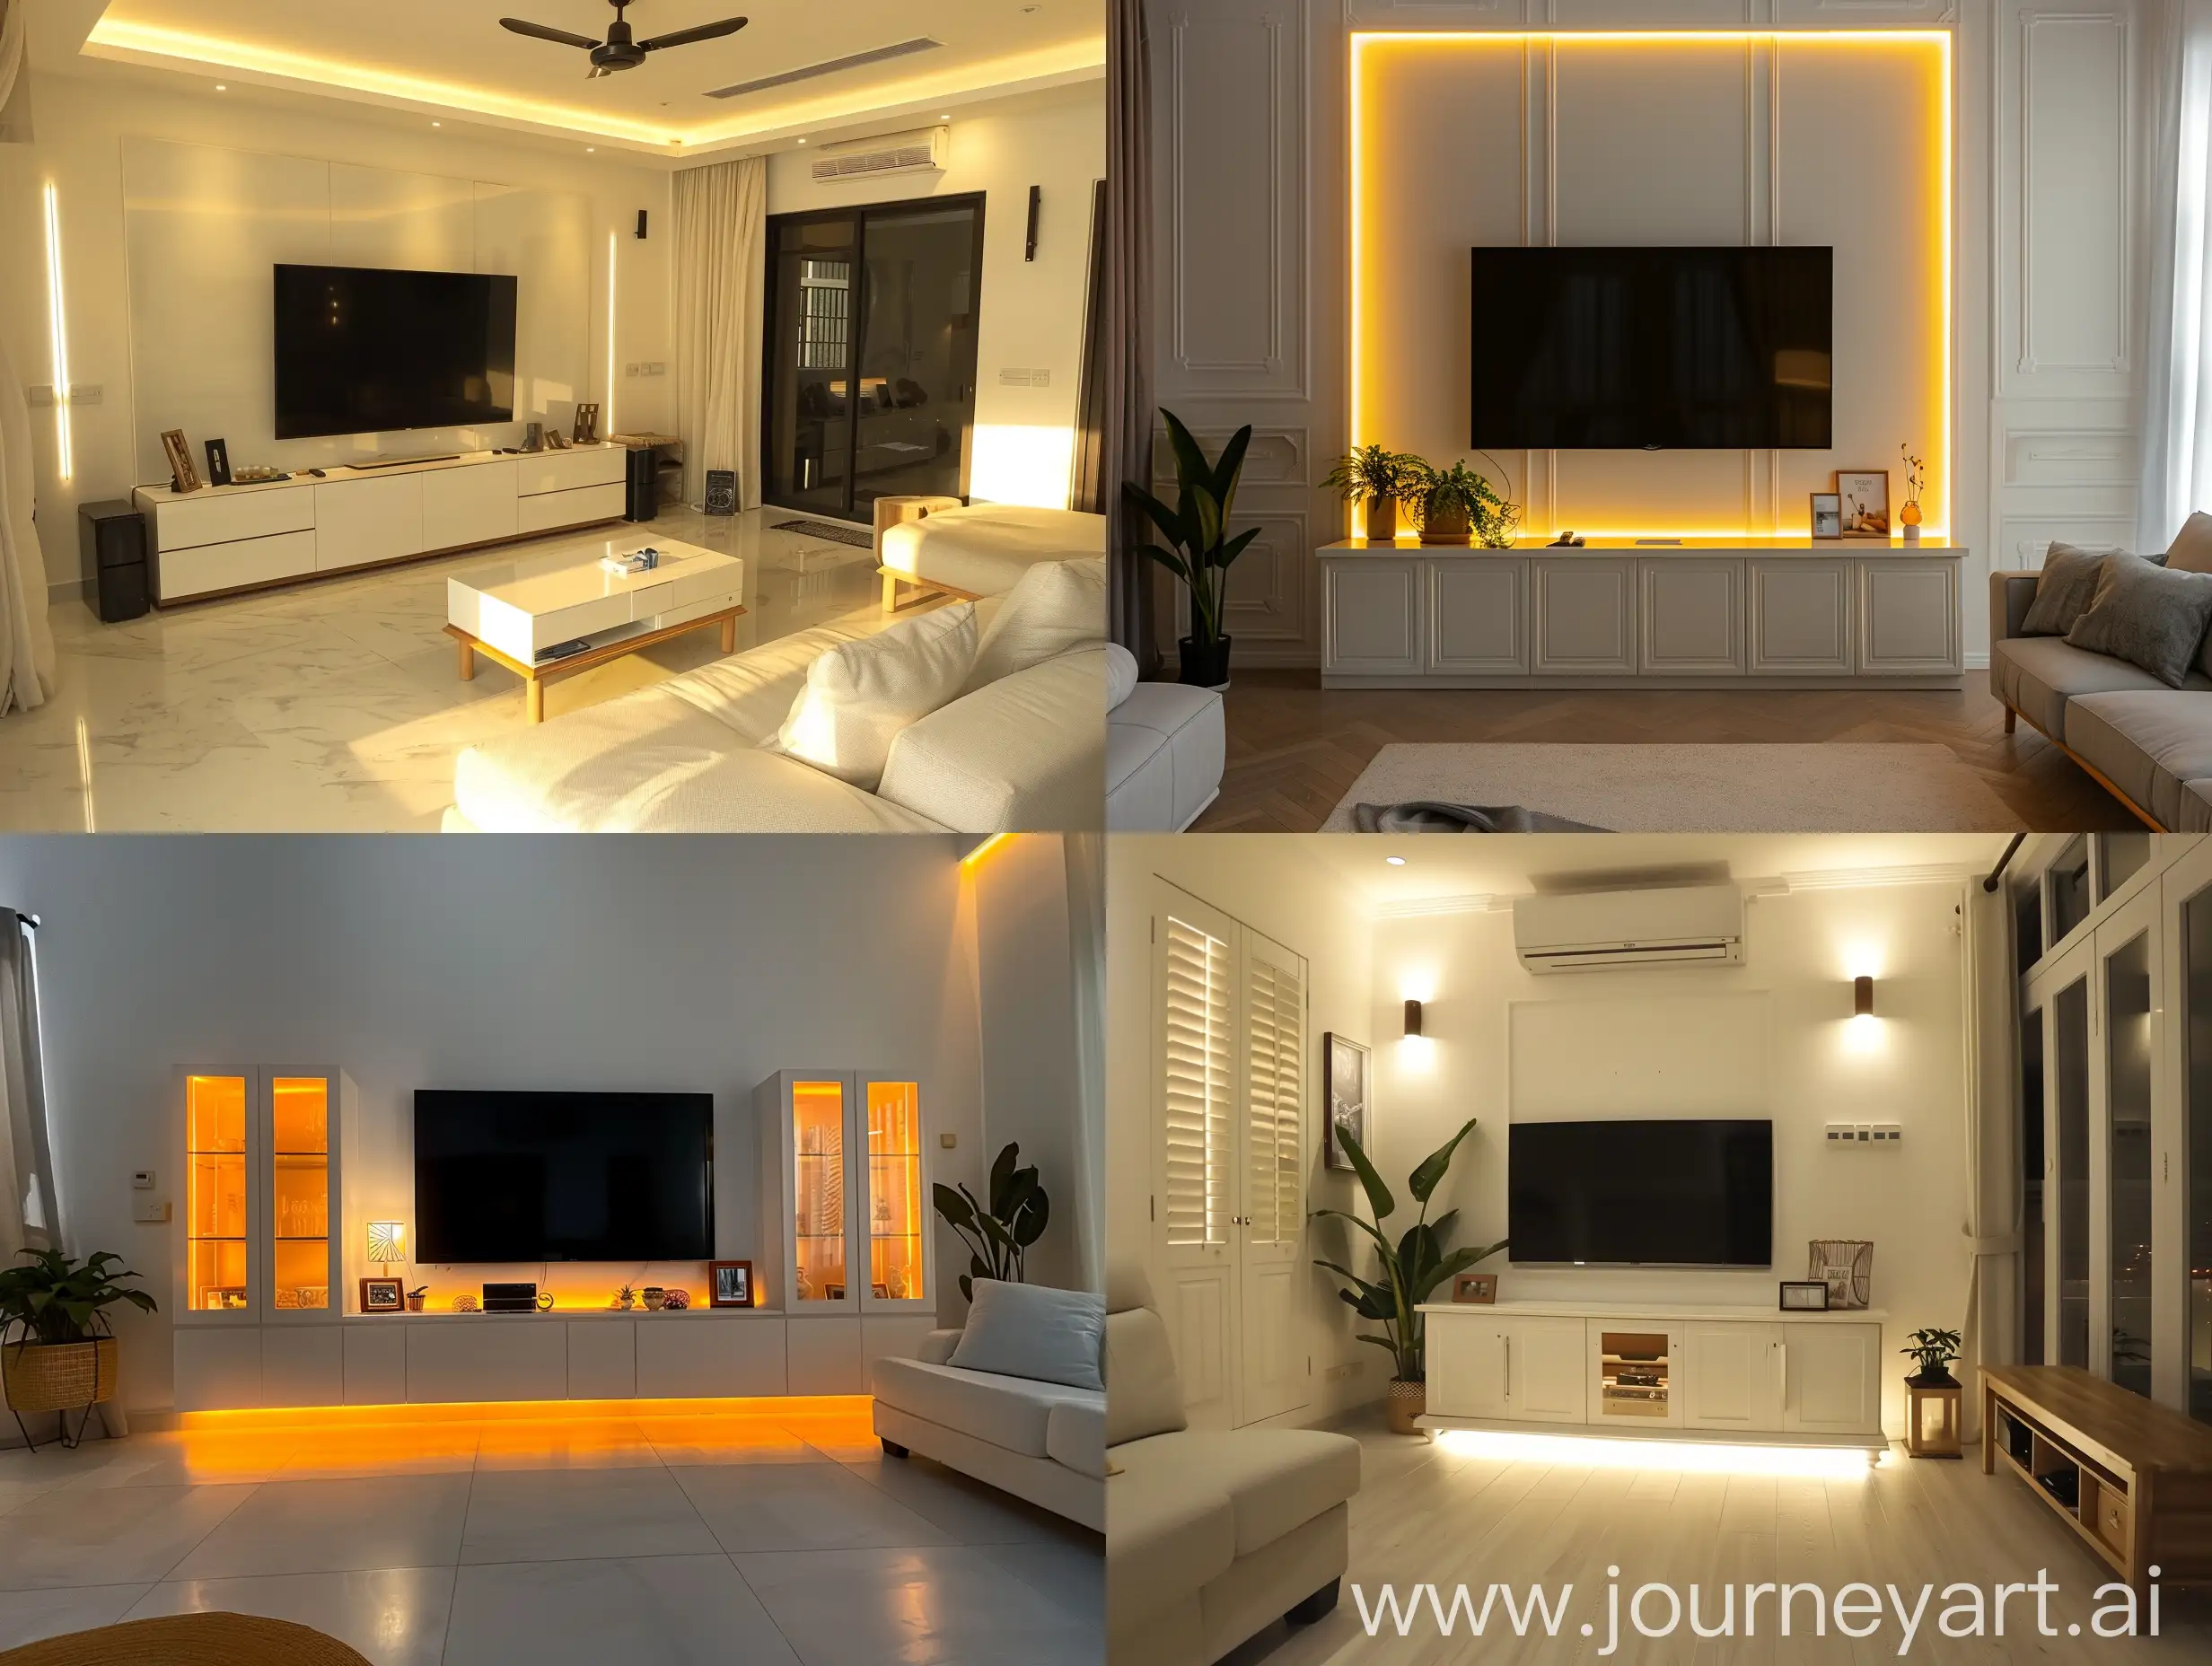 Minimalistic-White-Living-Room-with-Indian-Interior-Design-and-Warm-Lighting